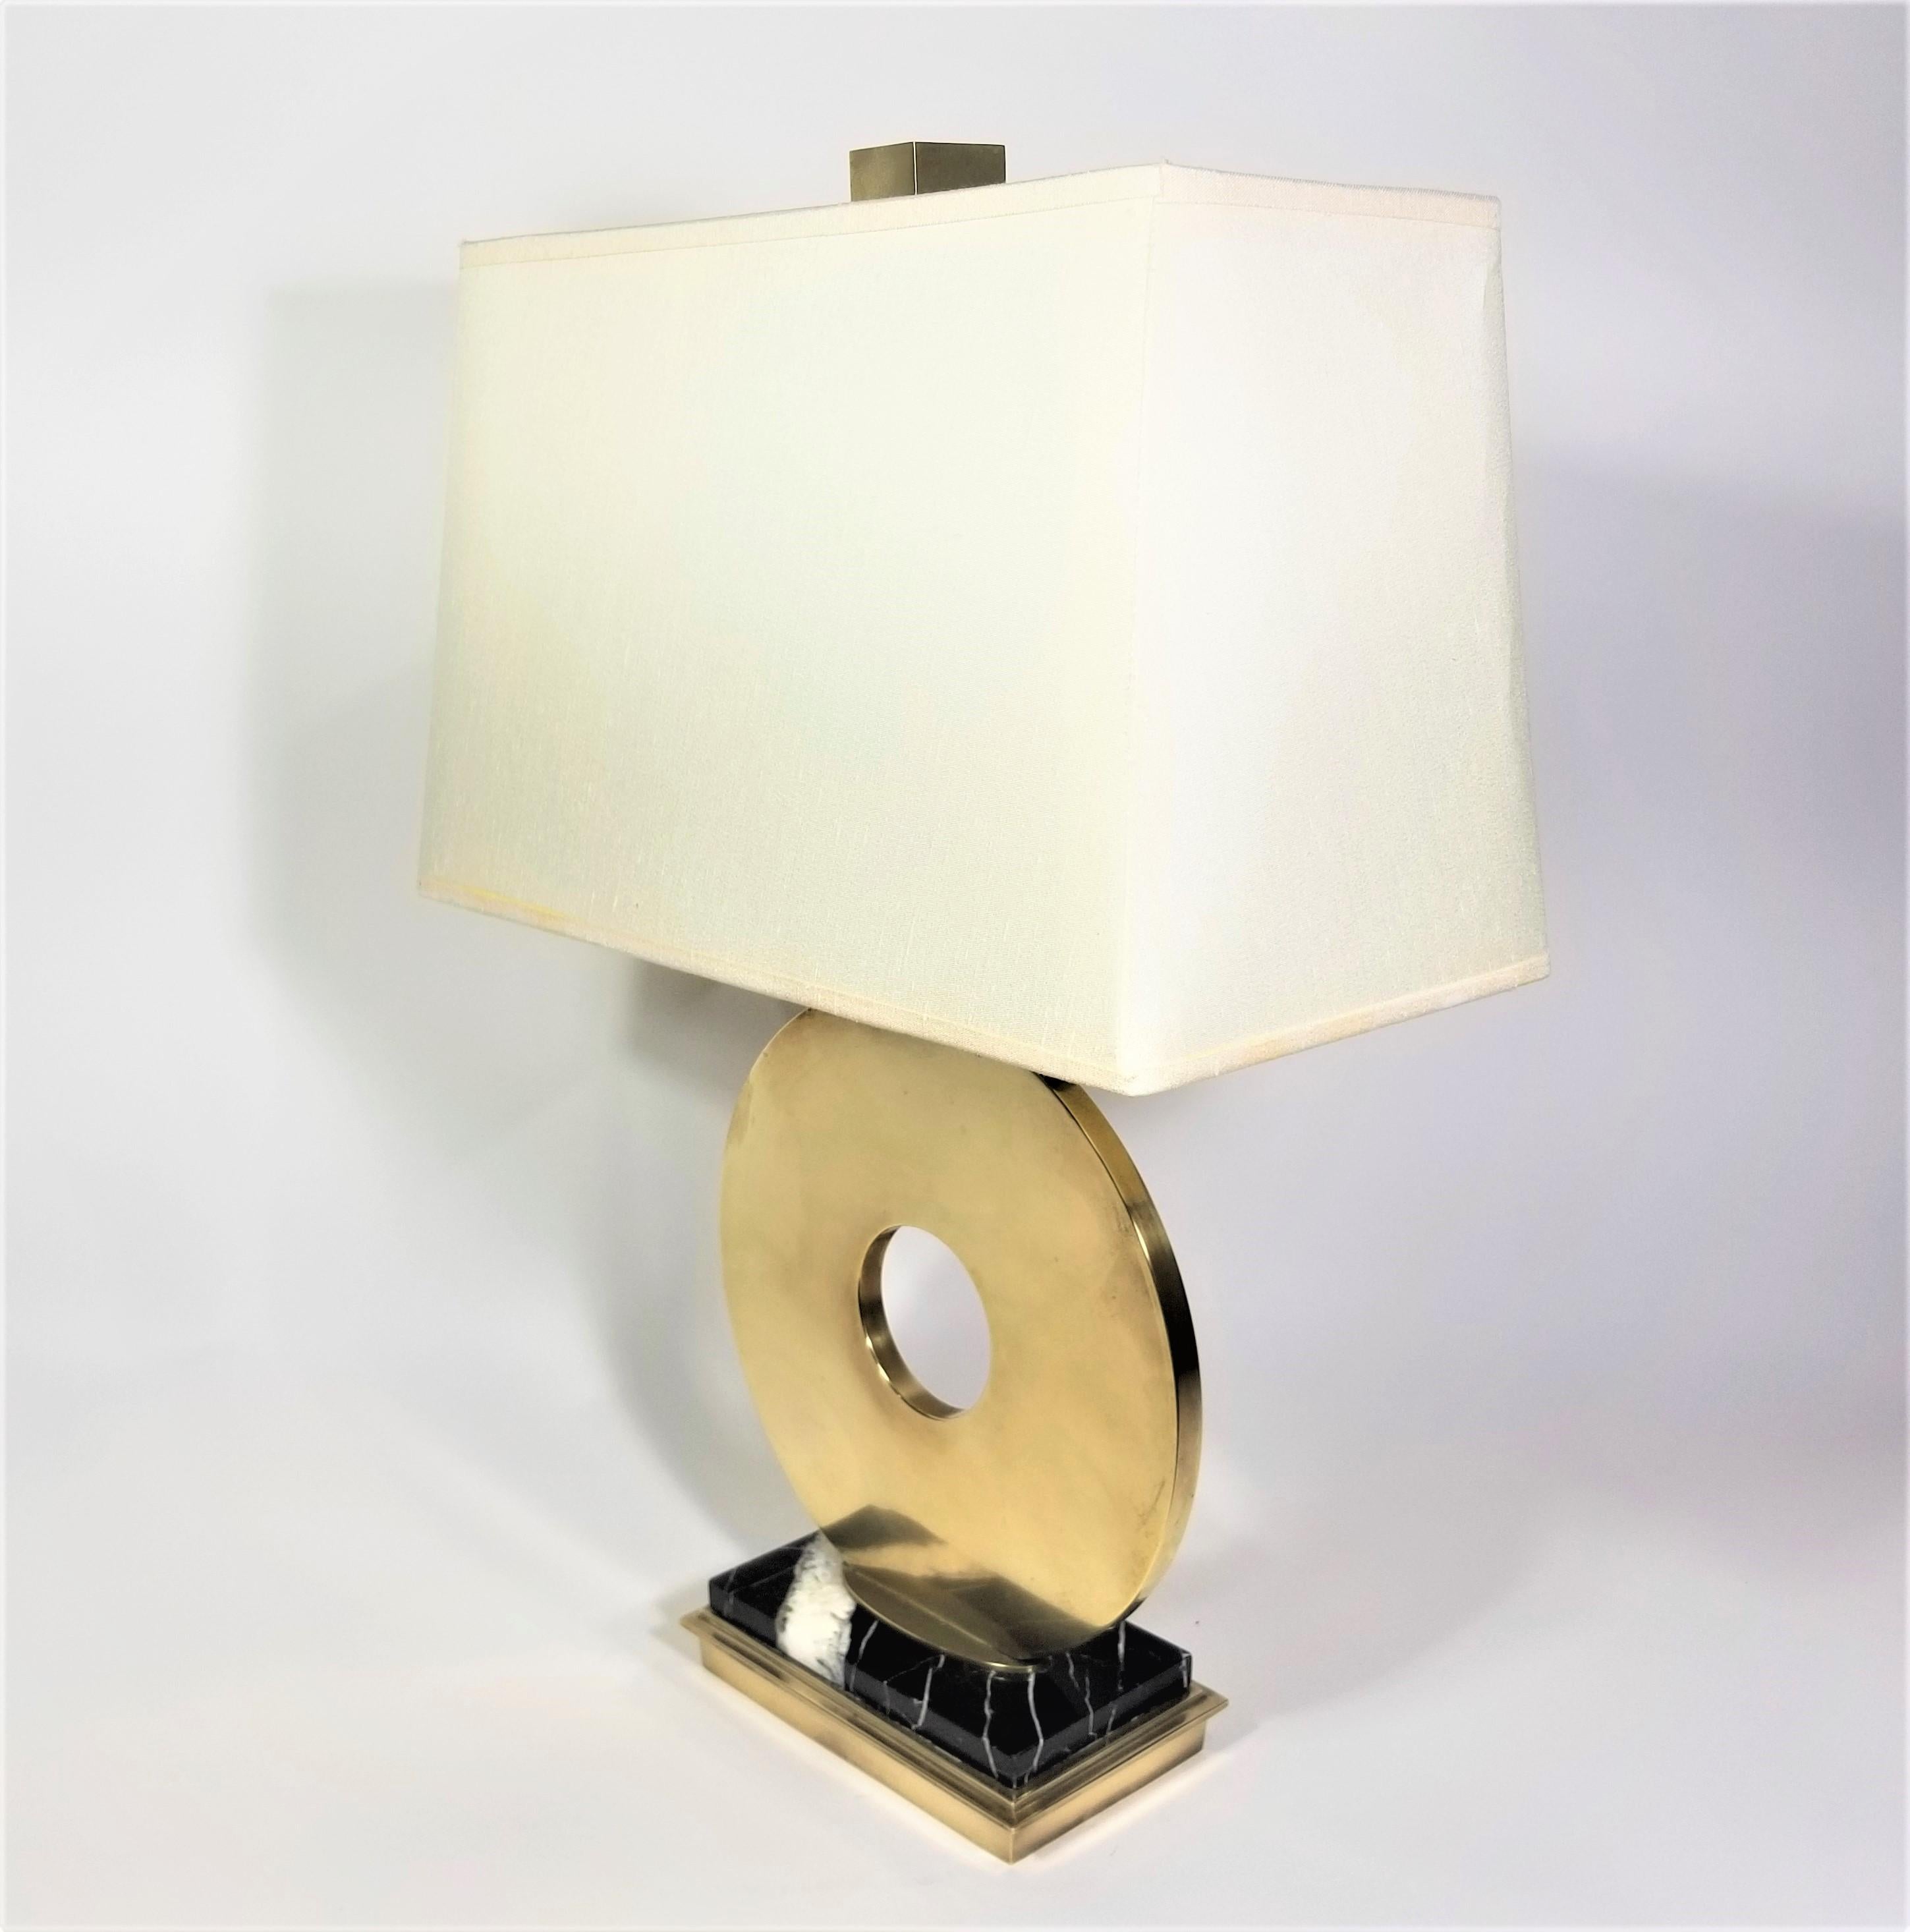 Vintage Robert Abbey table lamp. Solid brass and marble. Black marble with white veins. Modernist Abstract Design. Original shade with Robert Abbey Inc Marking. Brass cube finial. 

